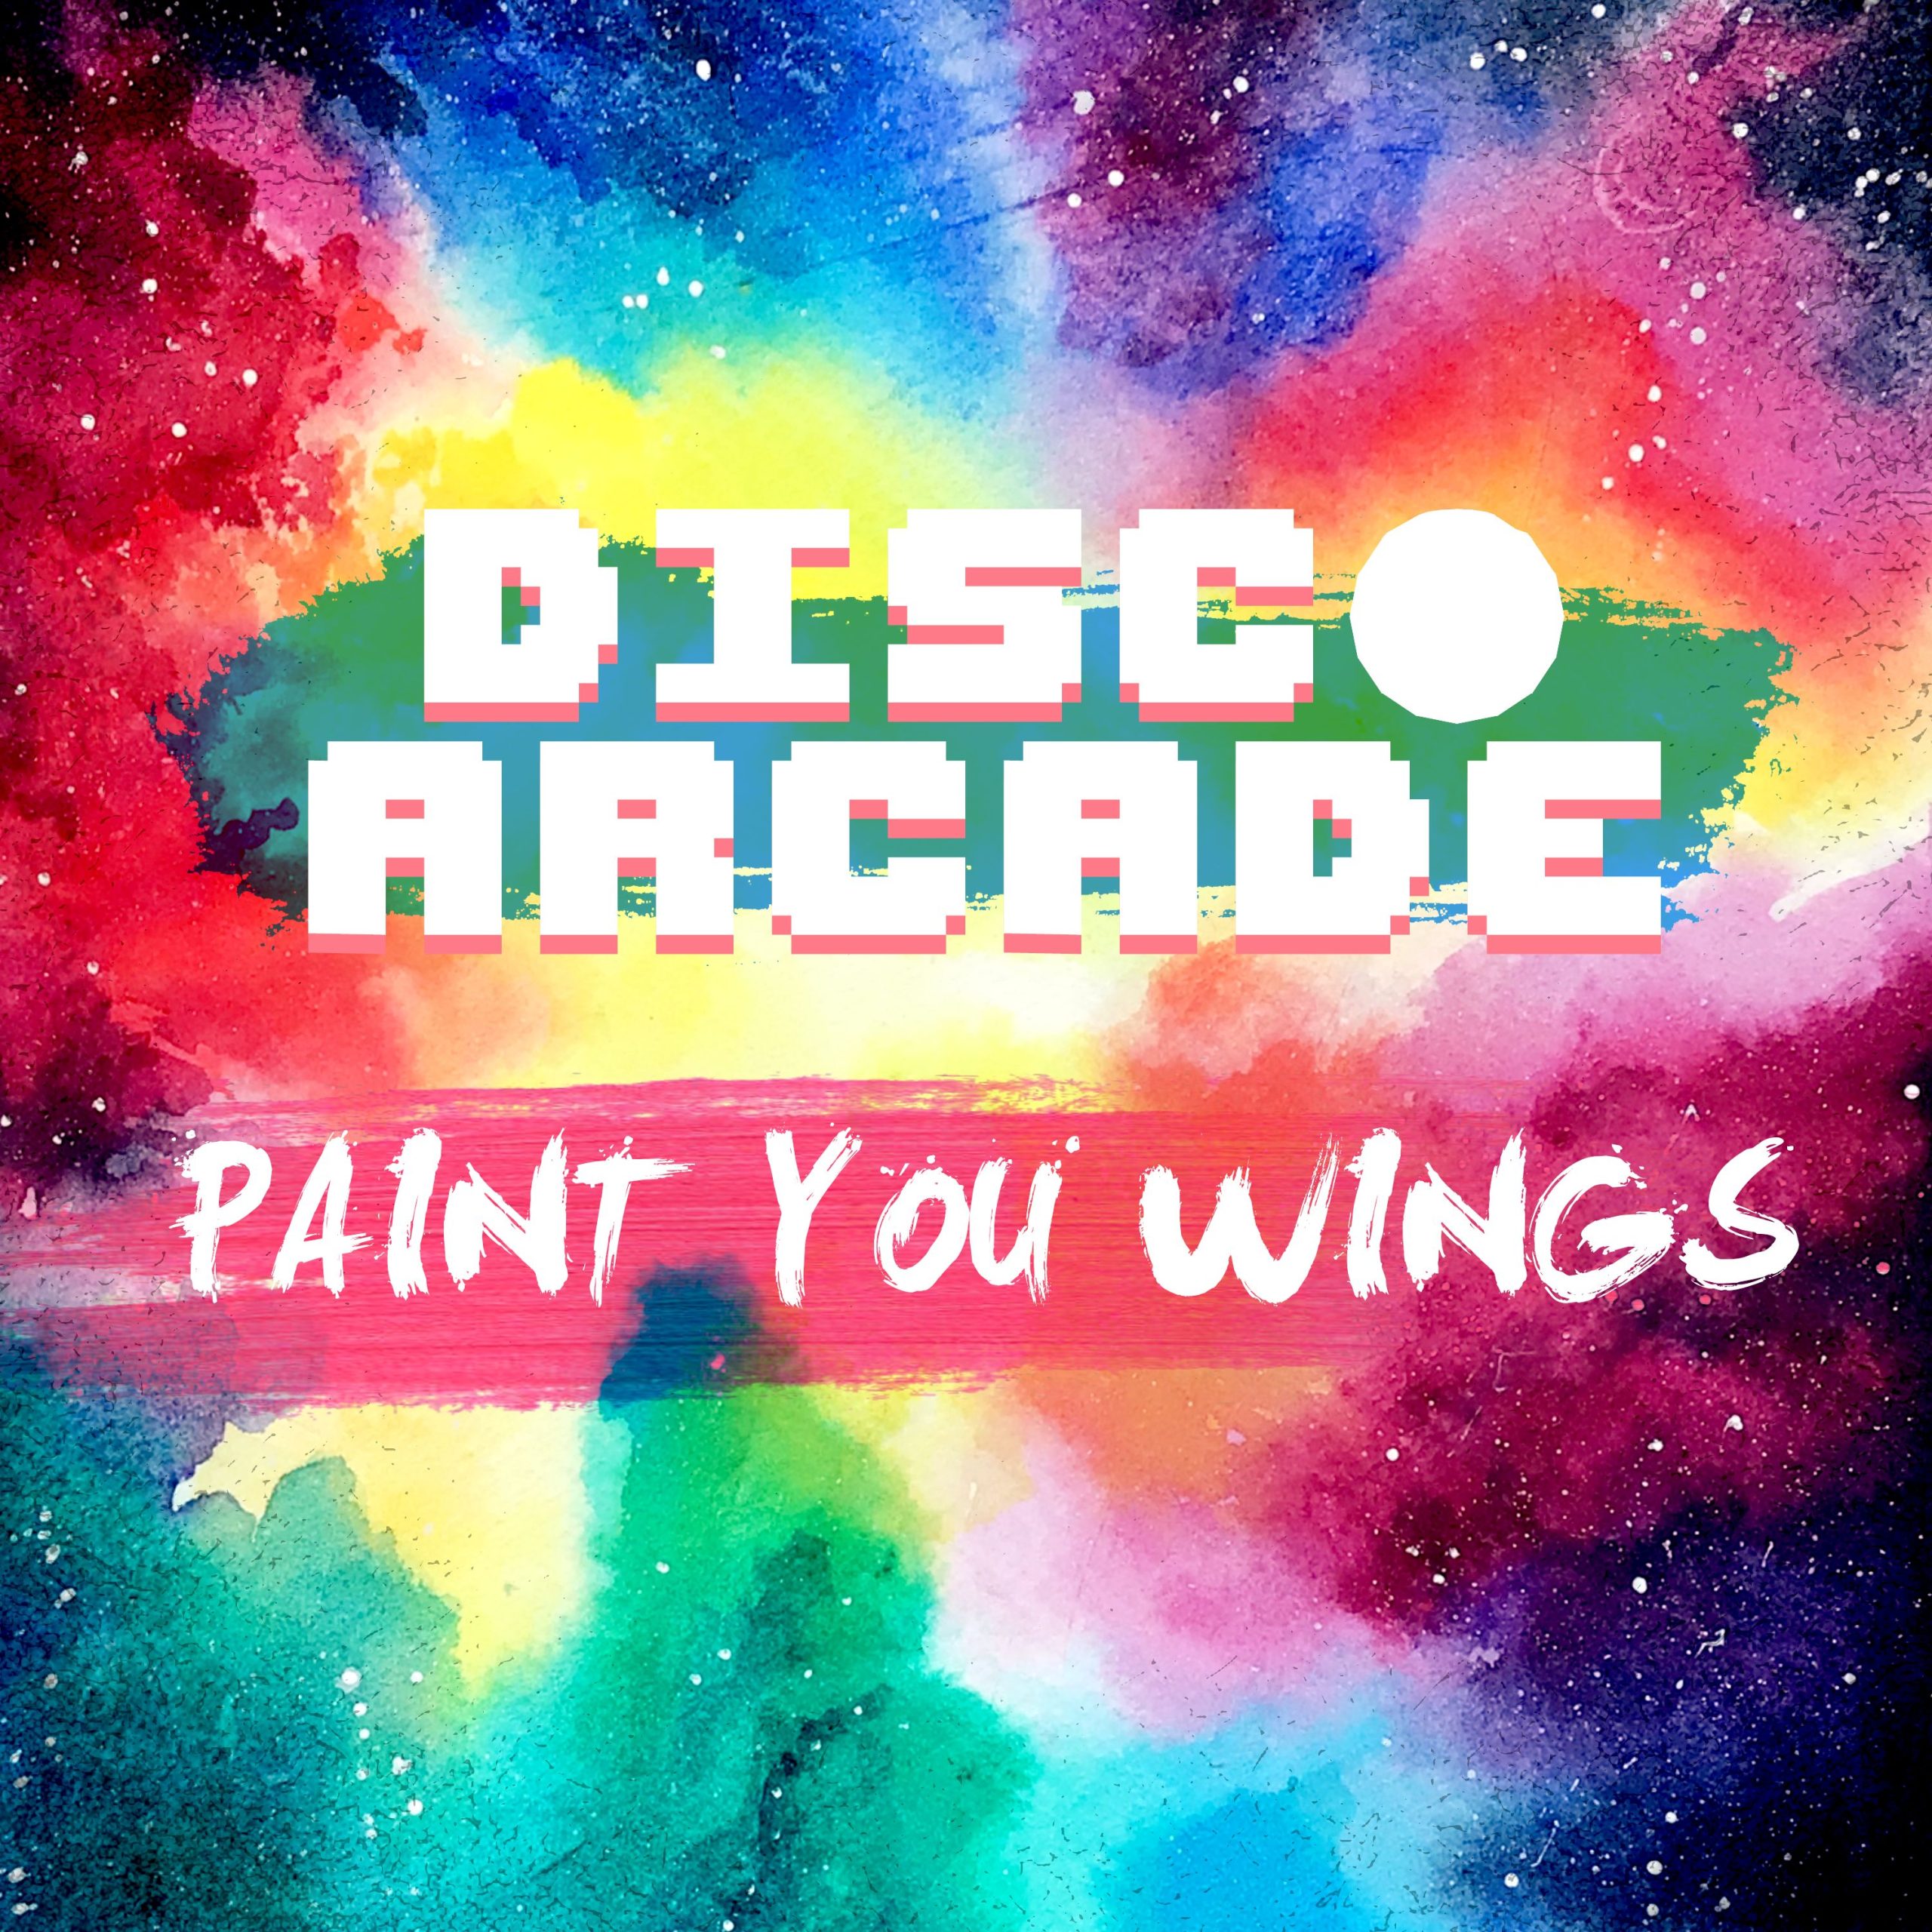 paint you wings - disco arcade - sweden - indie - indie music - indie pop - new music - music blog - wolf in a suit - wolfinasuit - wolf in a suit blog - wolf in a suit music blog